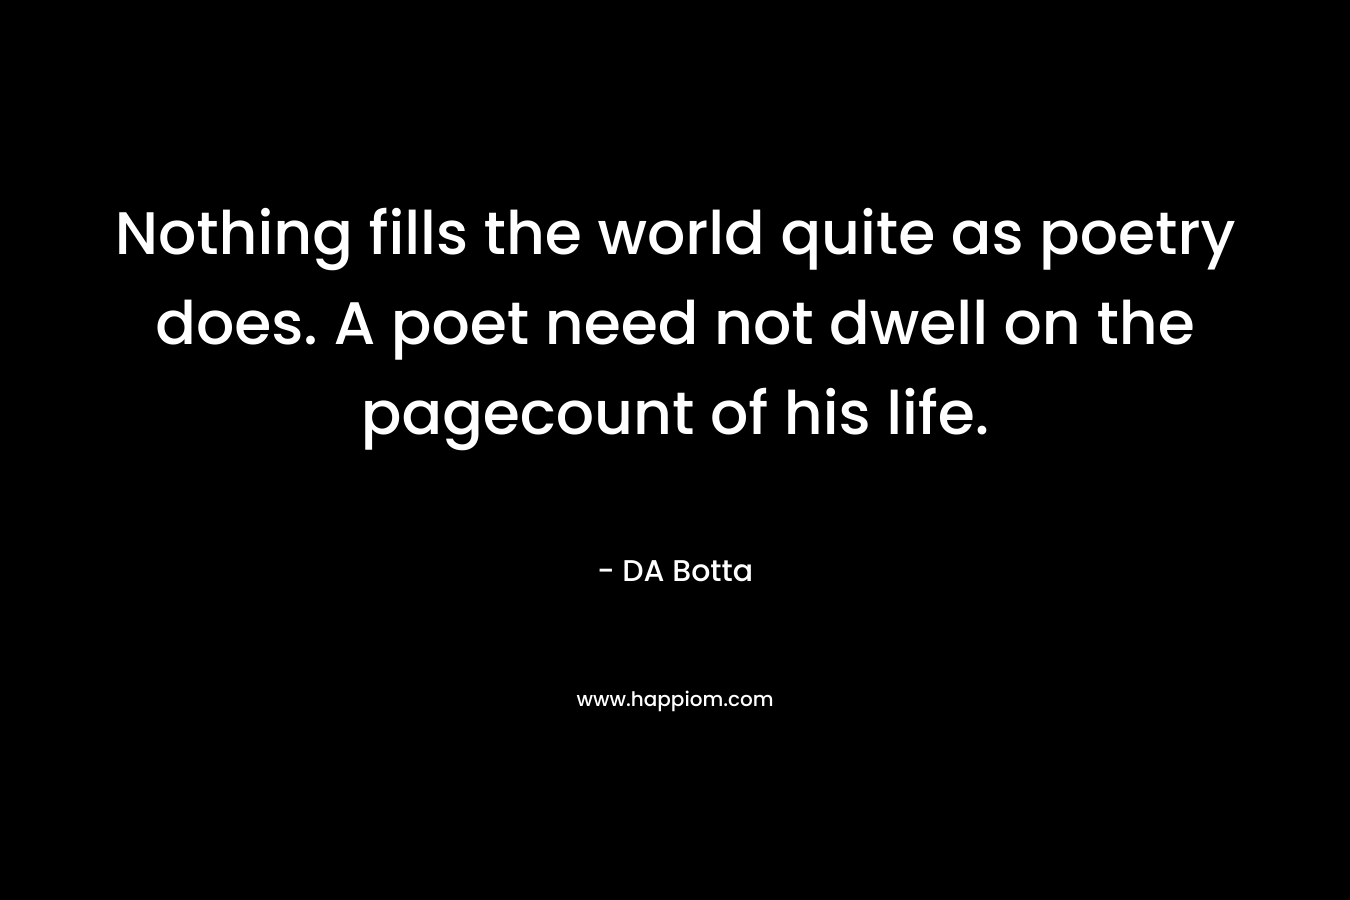 Nothing fills the world quite as poetry does. A poet need not dwell on the pagecount of his life. – DA Botta